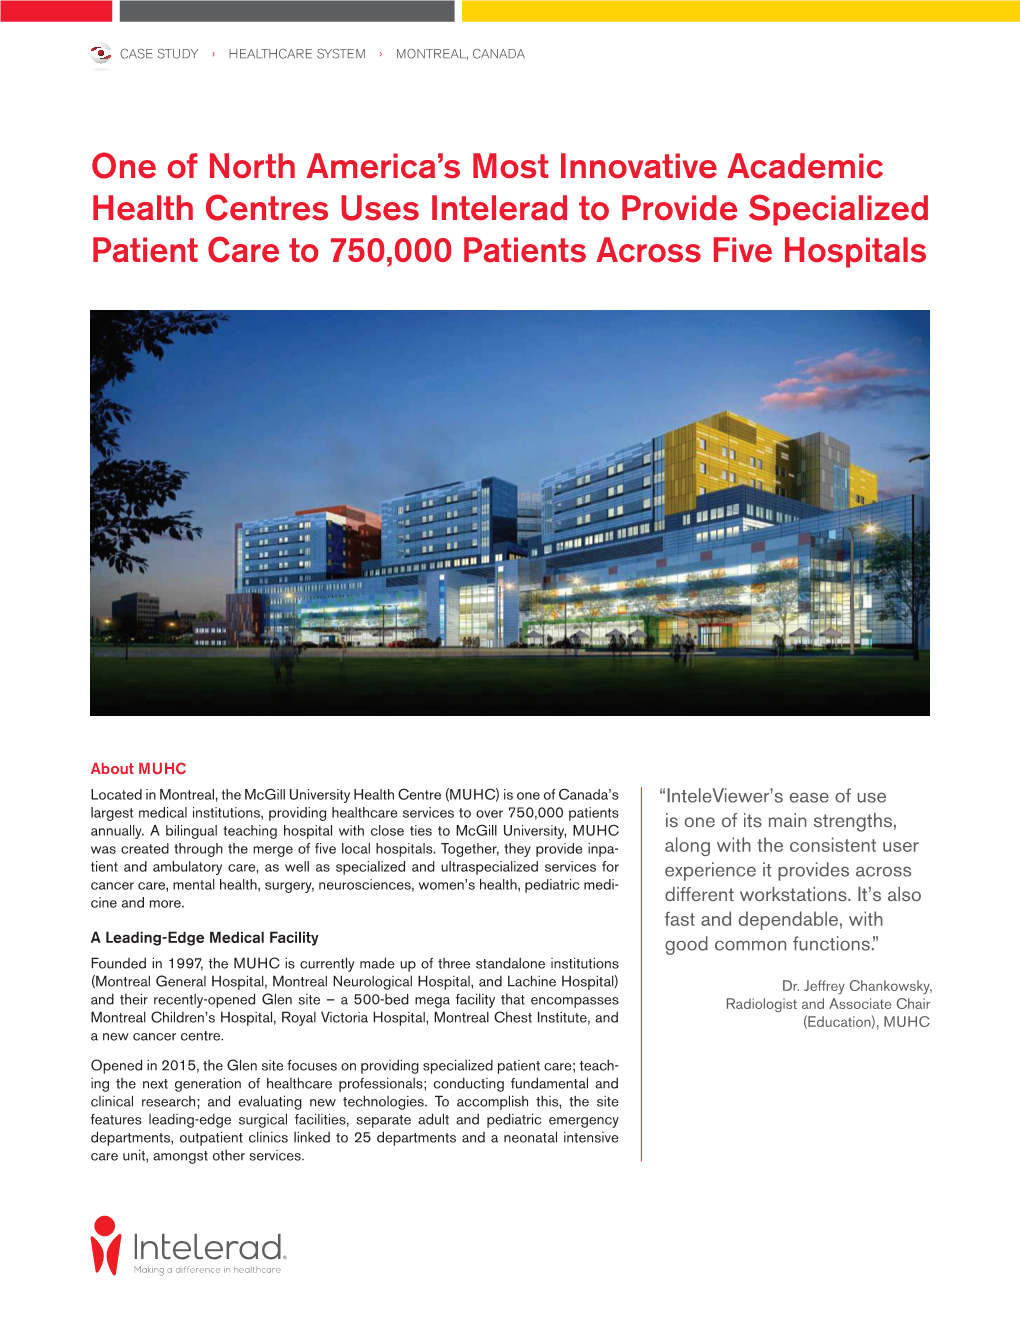 One of North America's Most Innovative Academic Health Centres Uses Intelerad to Provide Specialized Patient Care to 750,000 P